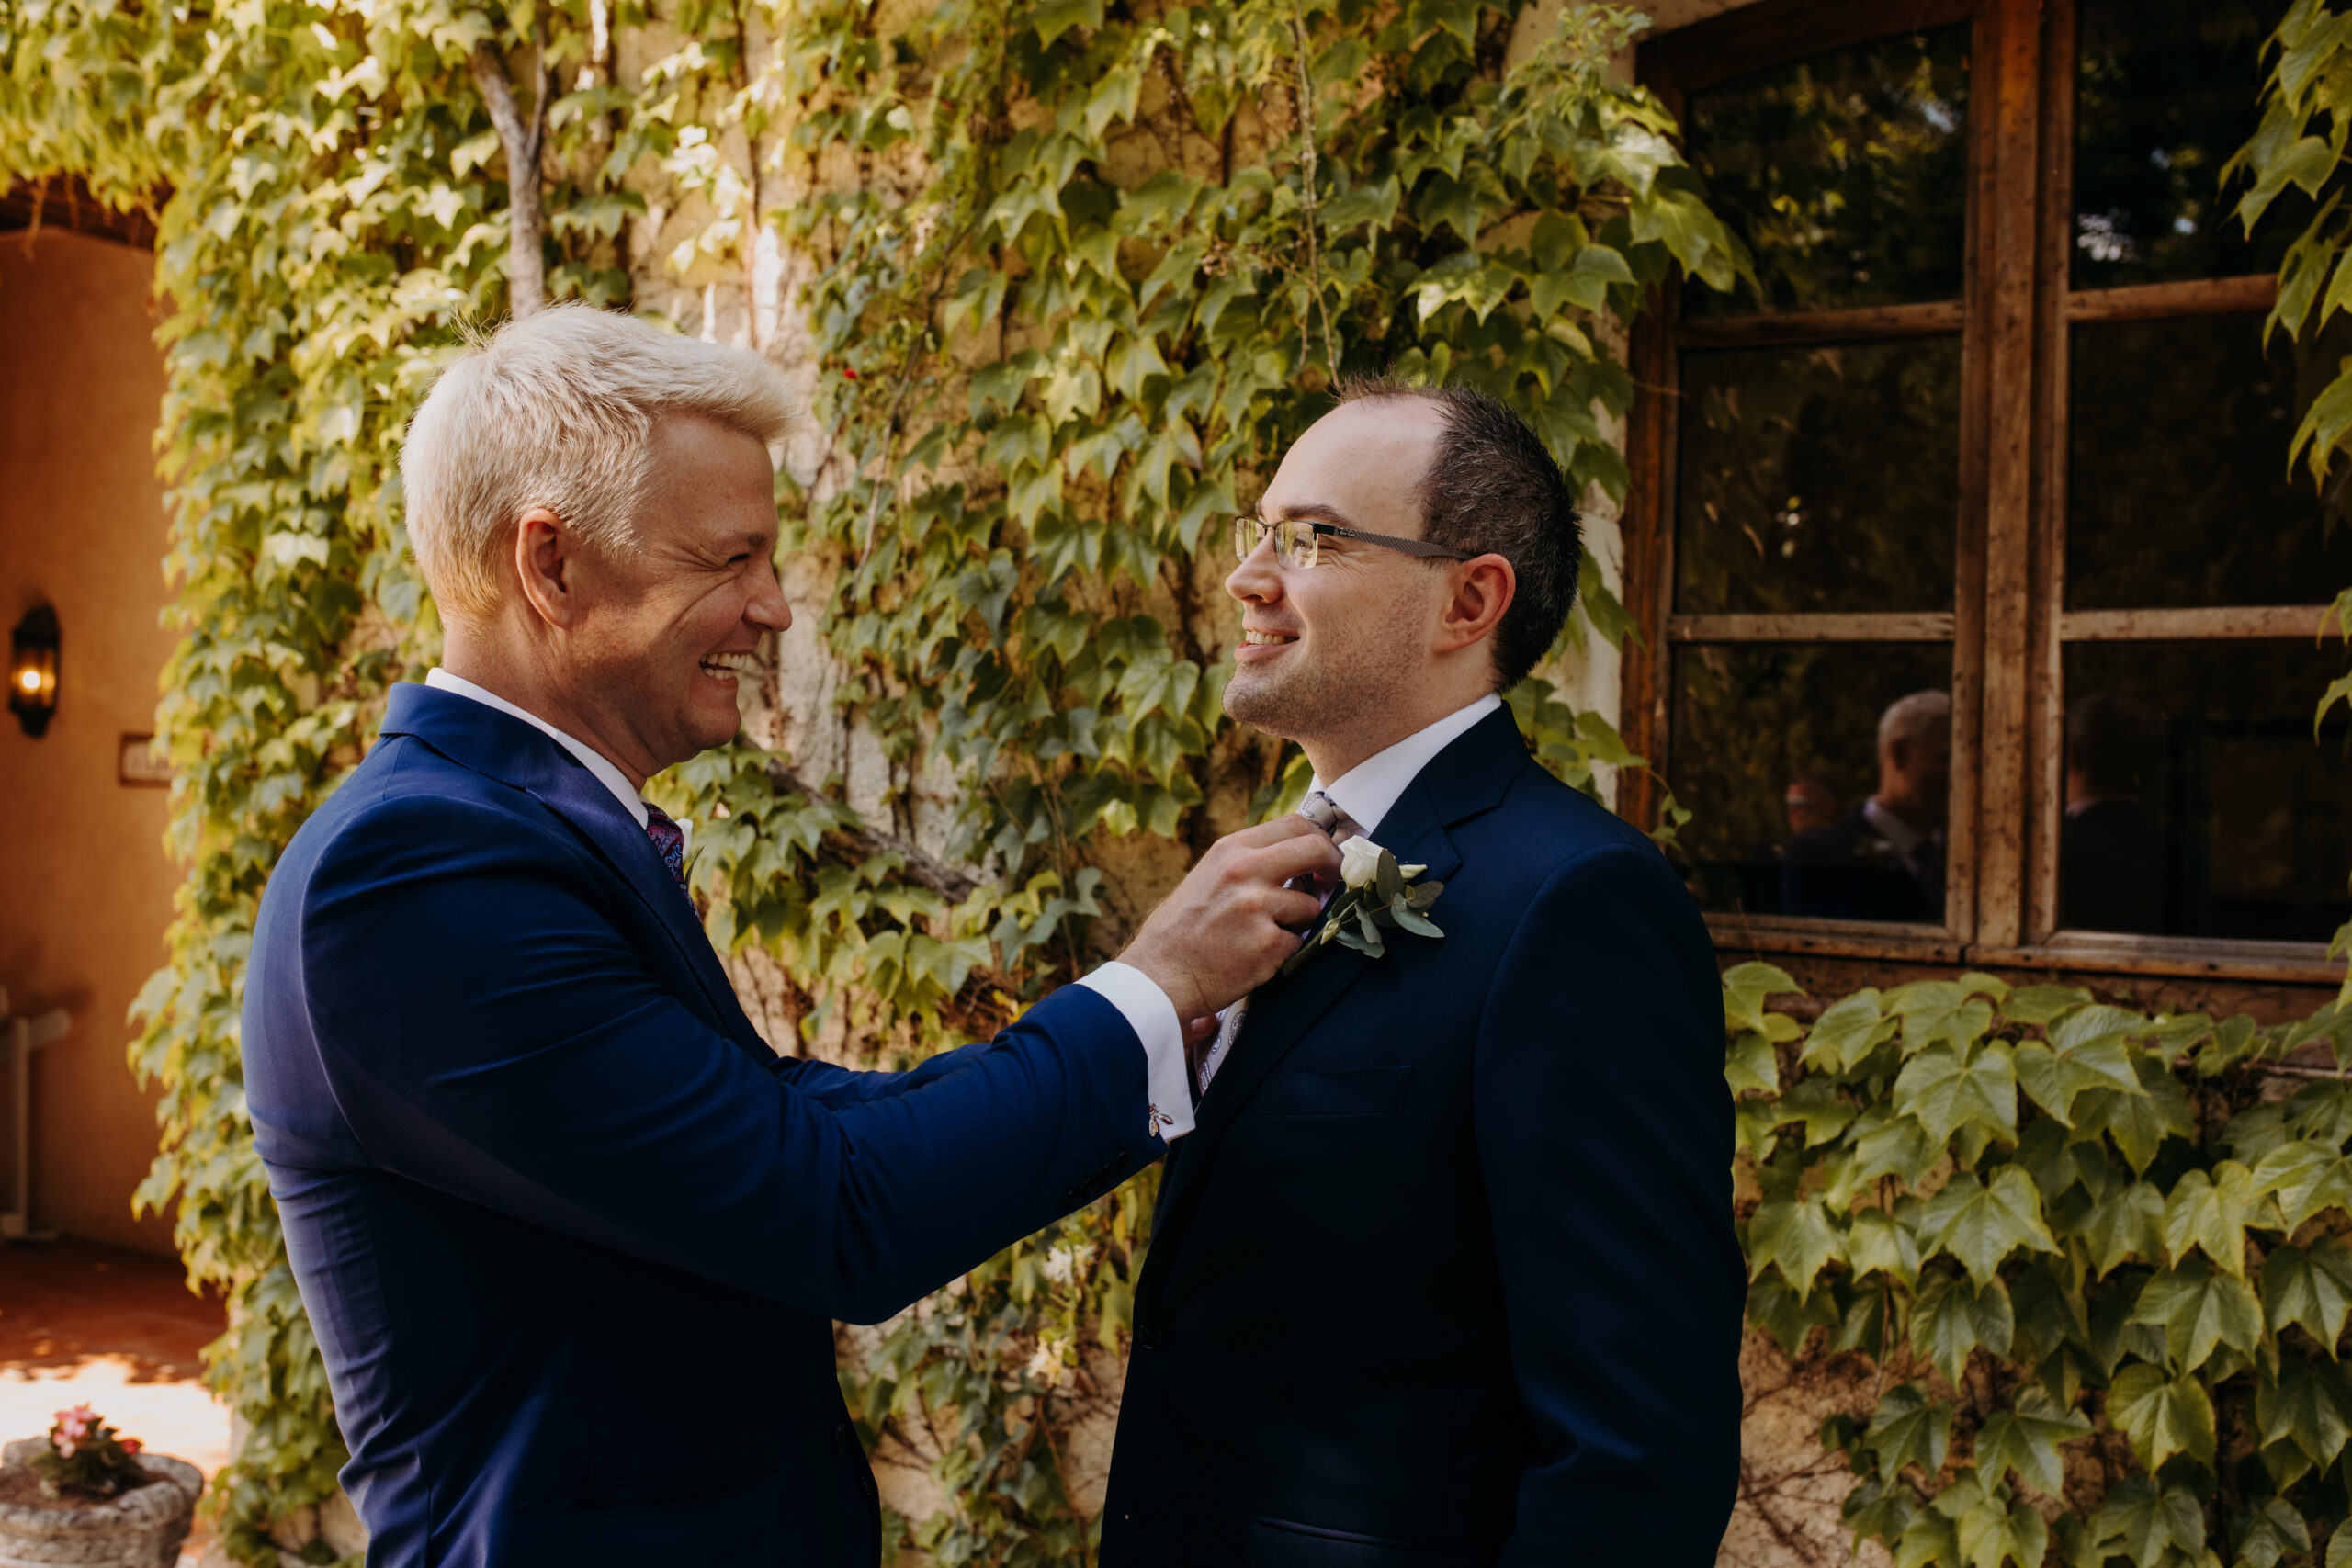 A best man with white hair adjusts the tie of a groom outside about to get married. both are smiling. 